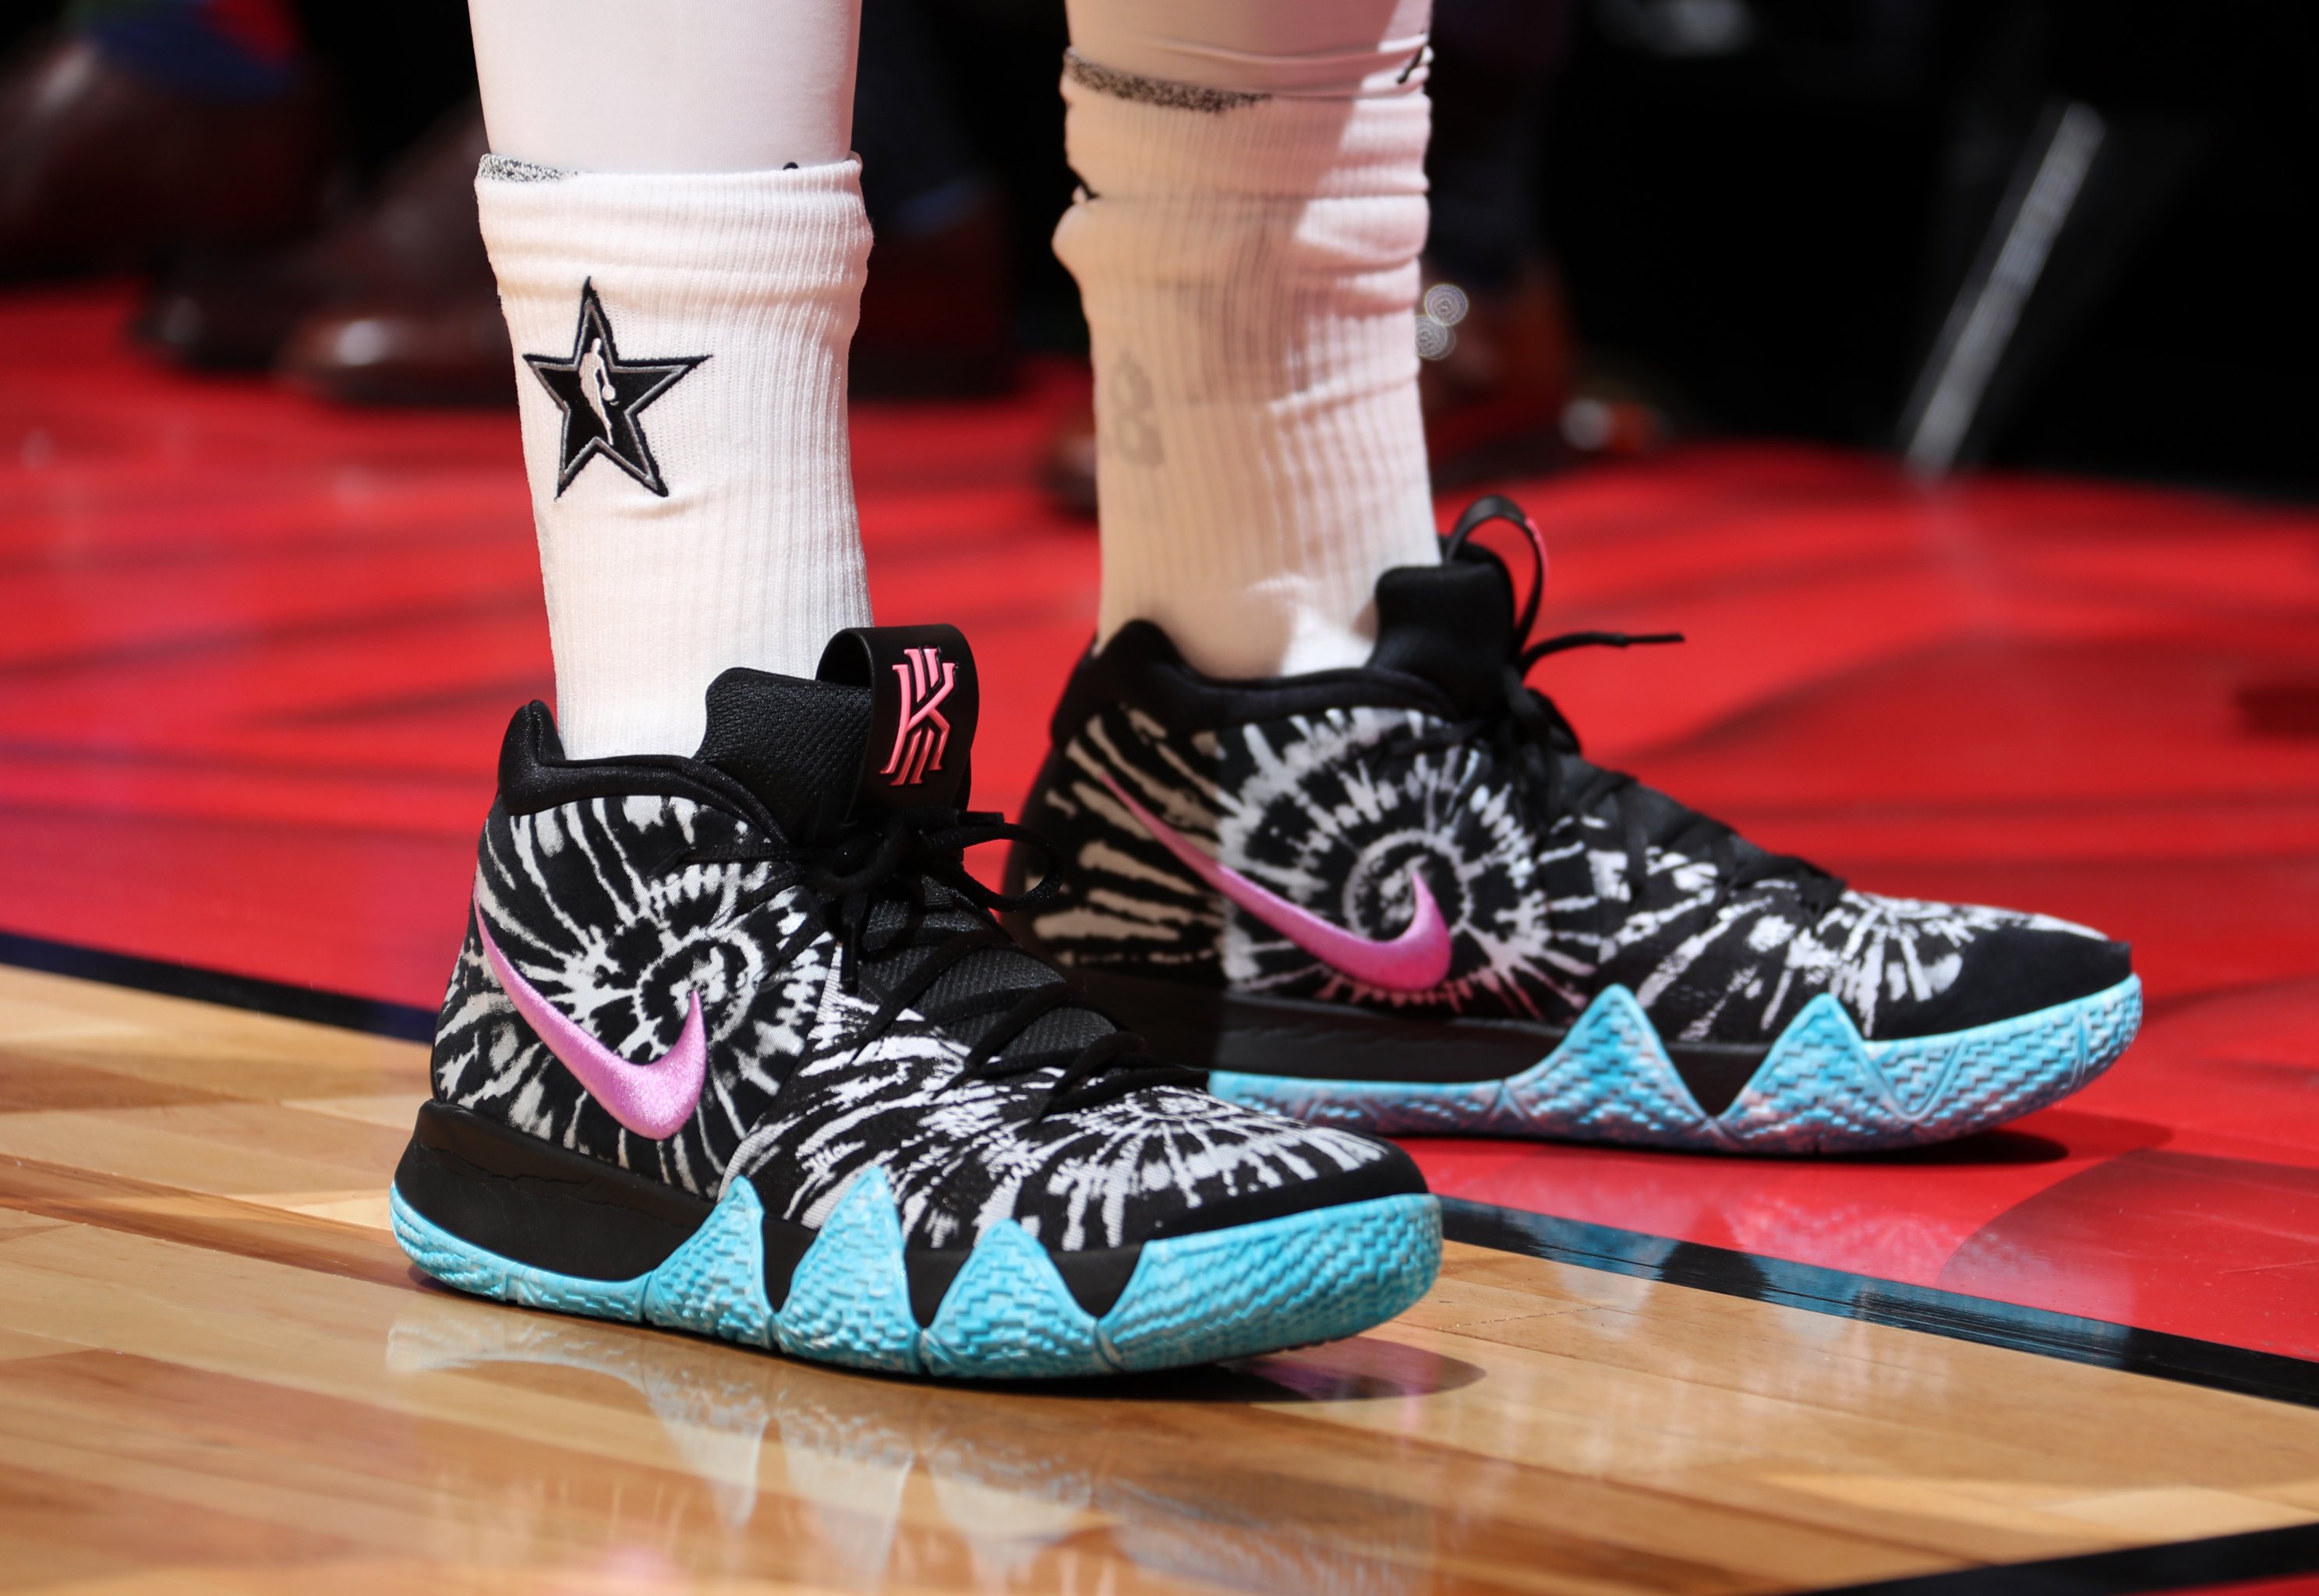 Check Out Stephen Curry's Under Armour NBA All-Star Kicks •